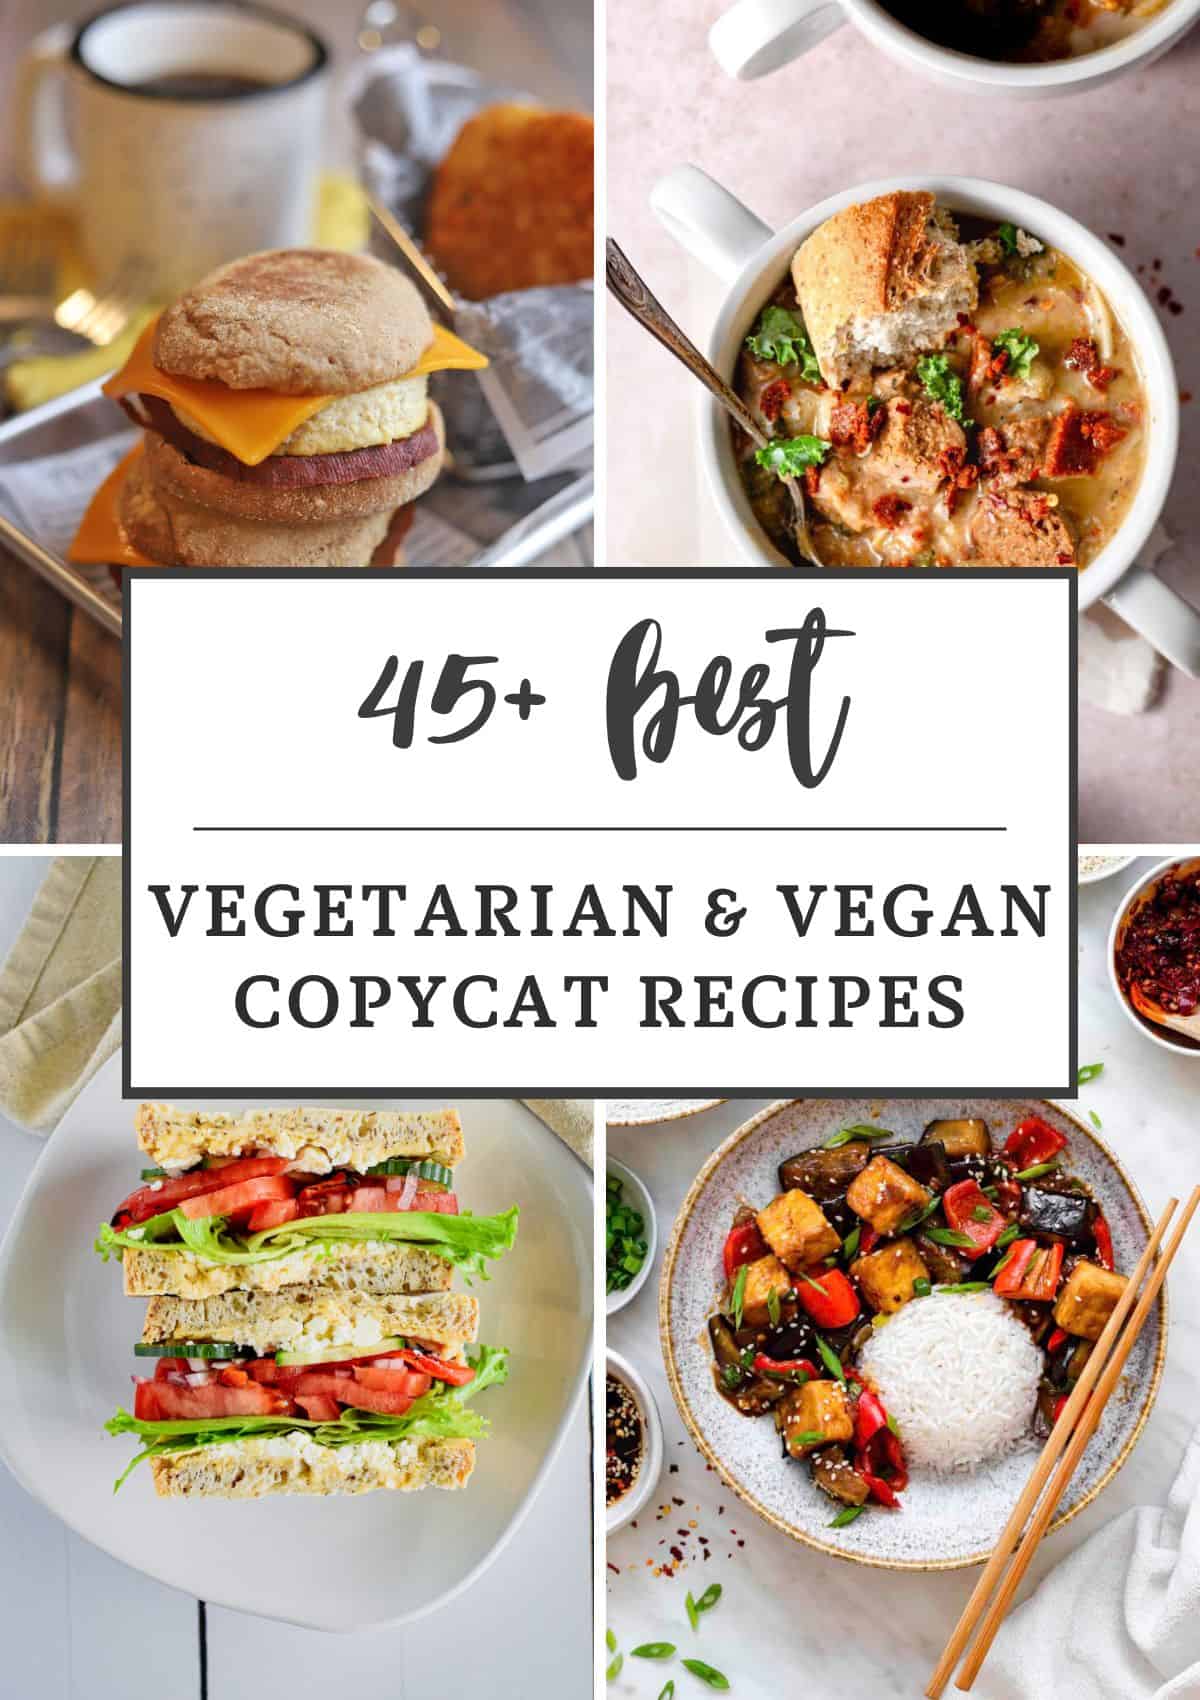 Collage of four photos for vegan copycat recipe roundup, with text overlay saying  "45+ Best Vegan and Vegetarian Copycat Recipes".